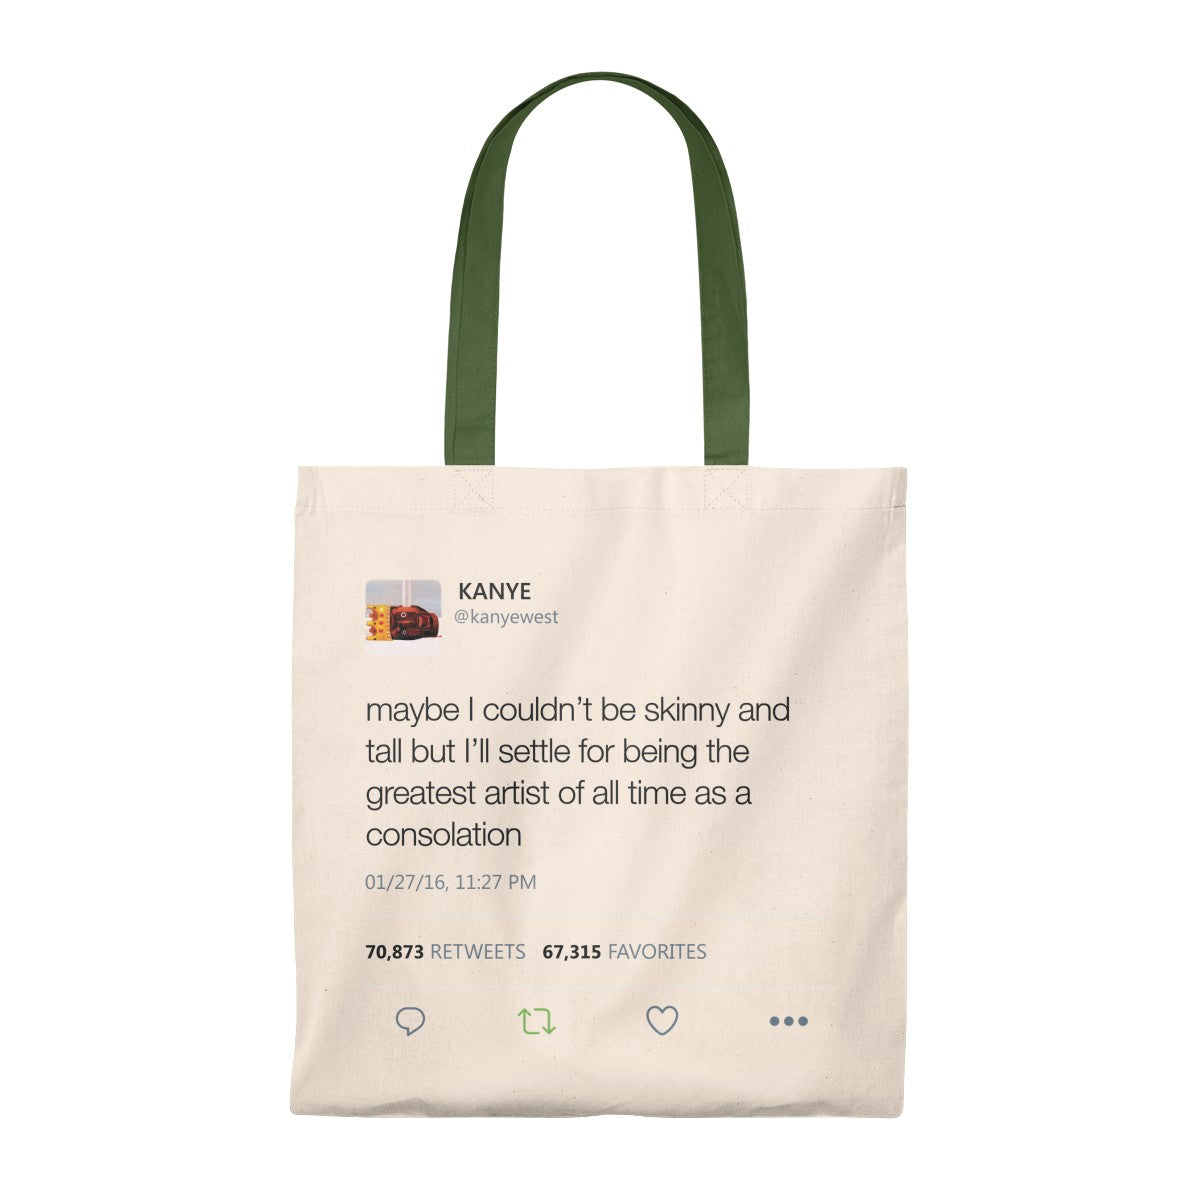 Maybe I Couldn't Be Skinny And Tall But I'll Settle For Being The Greatest Artist Of All Time.. Kanye West Tweet Tote Bag-Natural/Hunter-Archethype